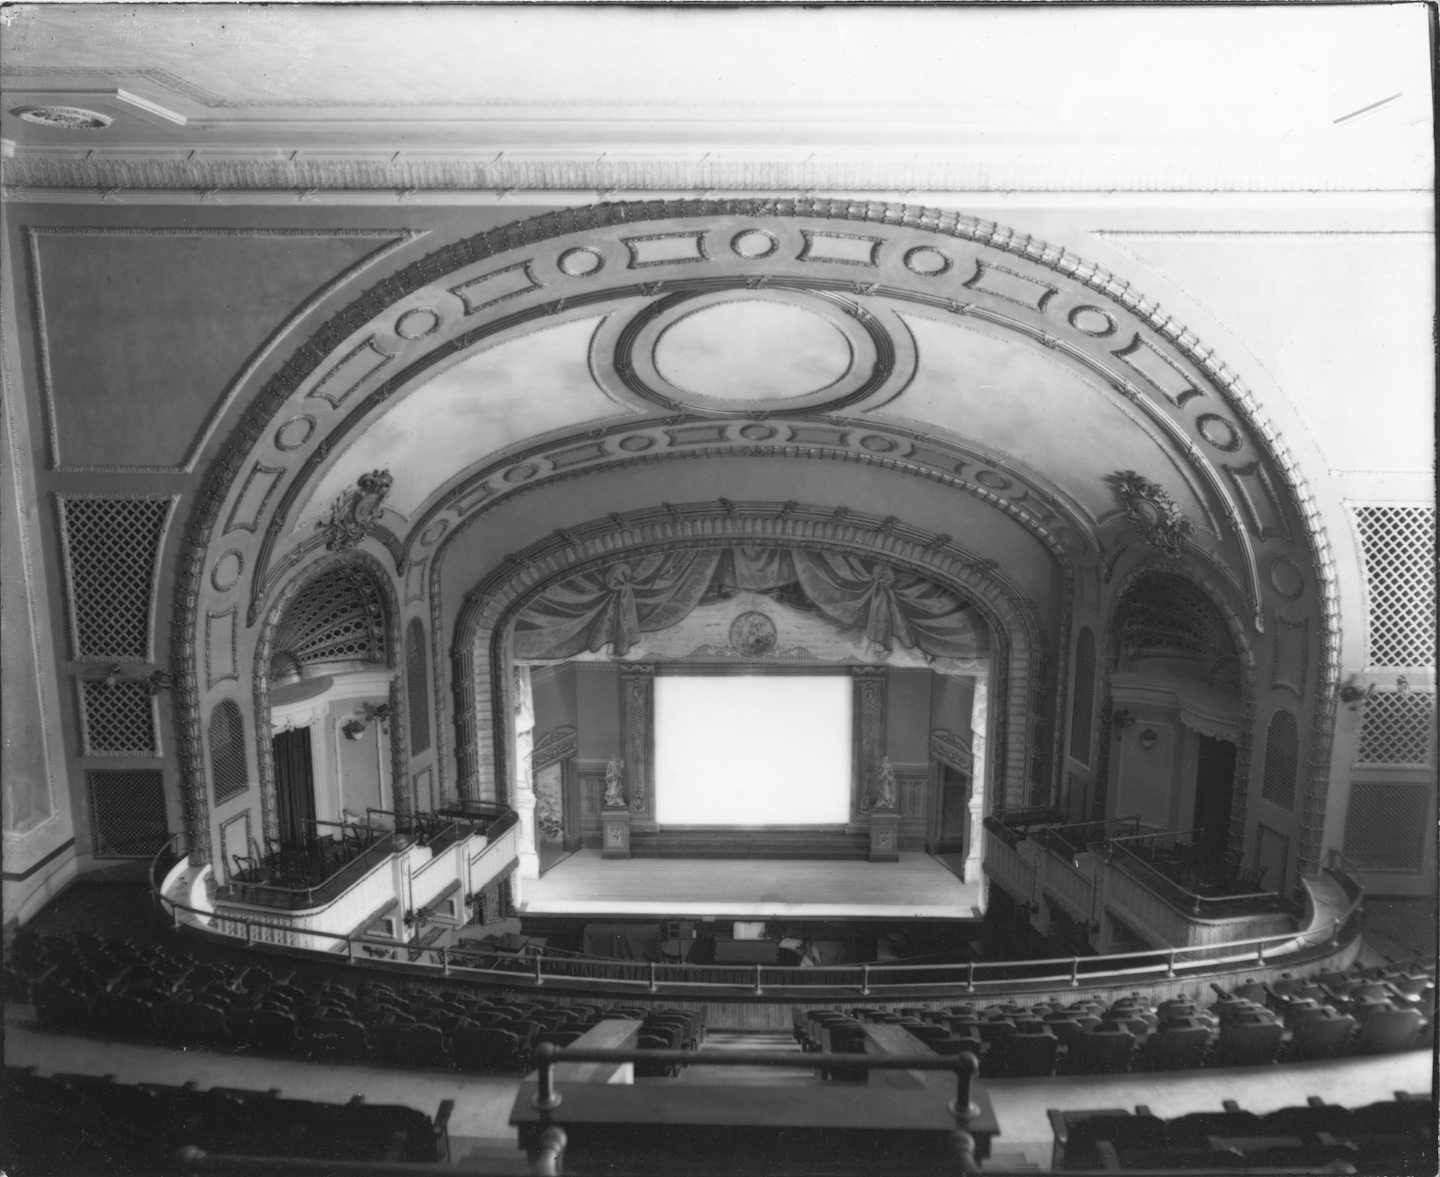 Majestic stage in 1915